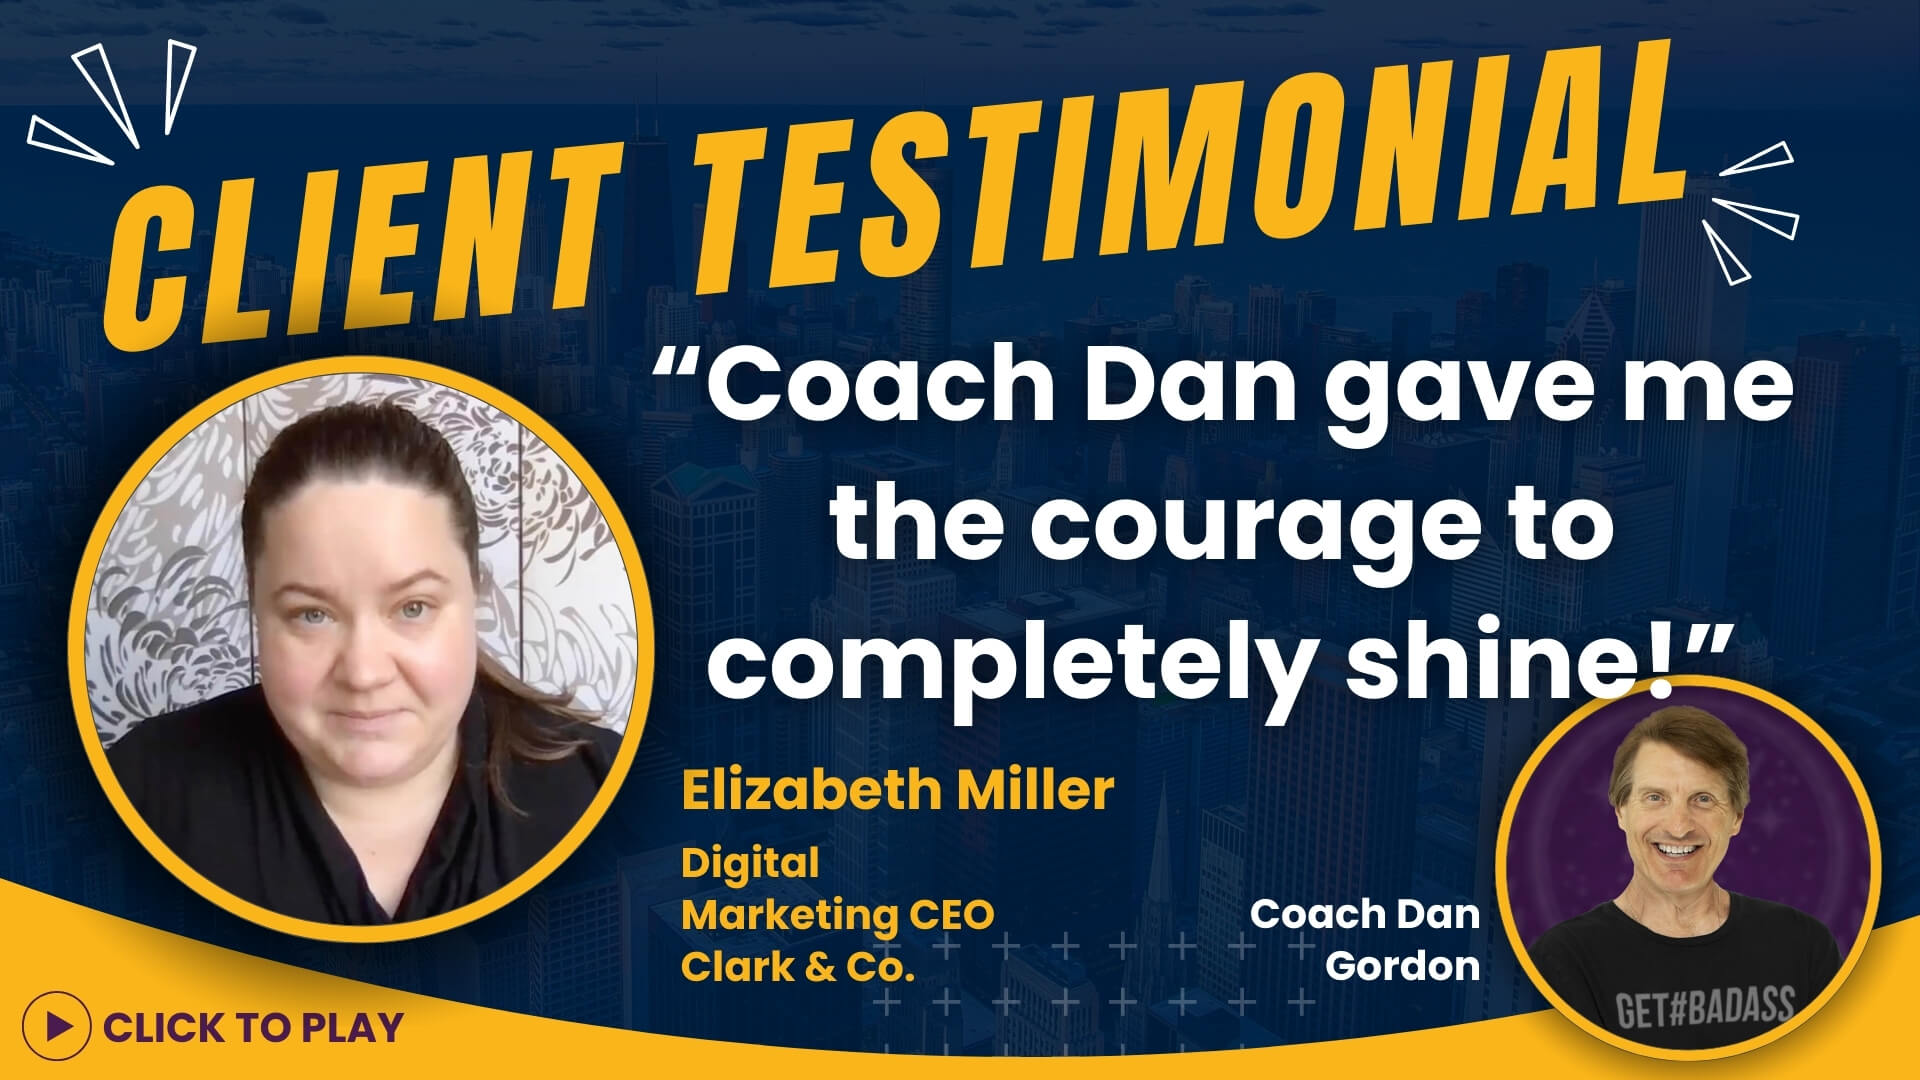 Elizabeth Miller, Digital Marketing CEO, shares her client testimonial, praising Coach Dan Gordon for the courage he inspired in her, highlighted by a 'Click to Play' video link.